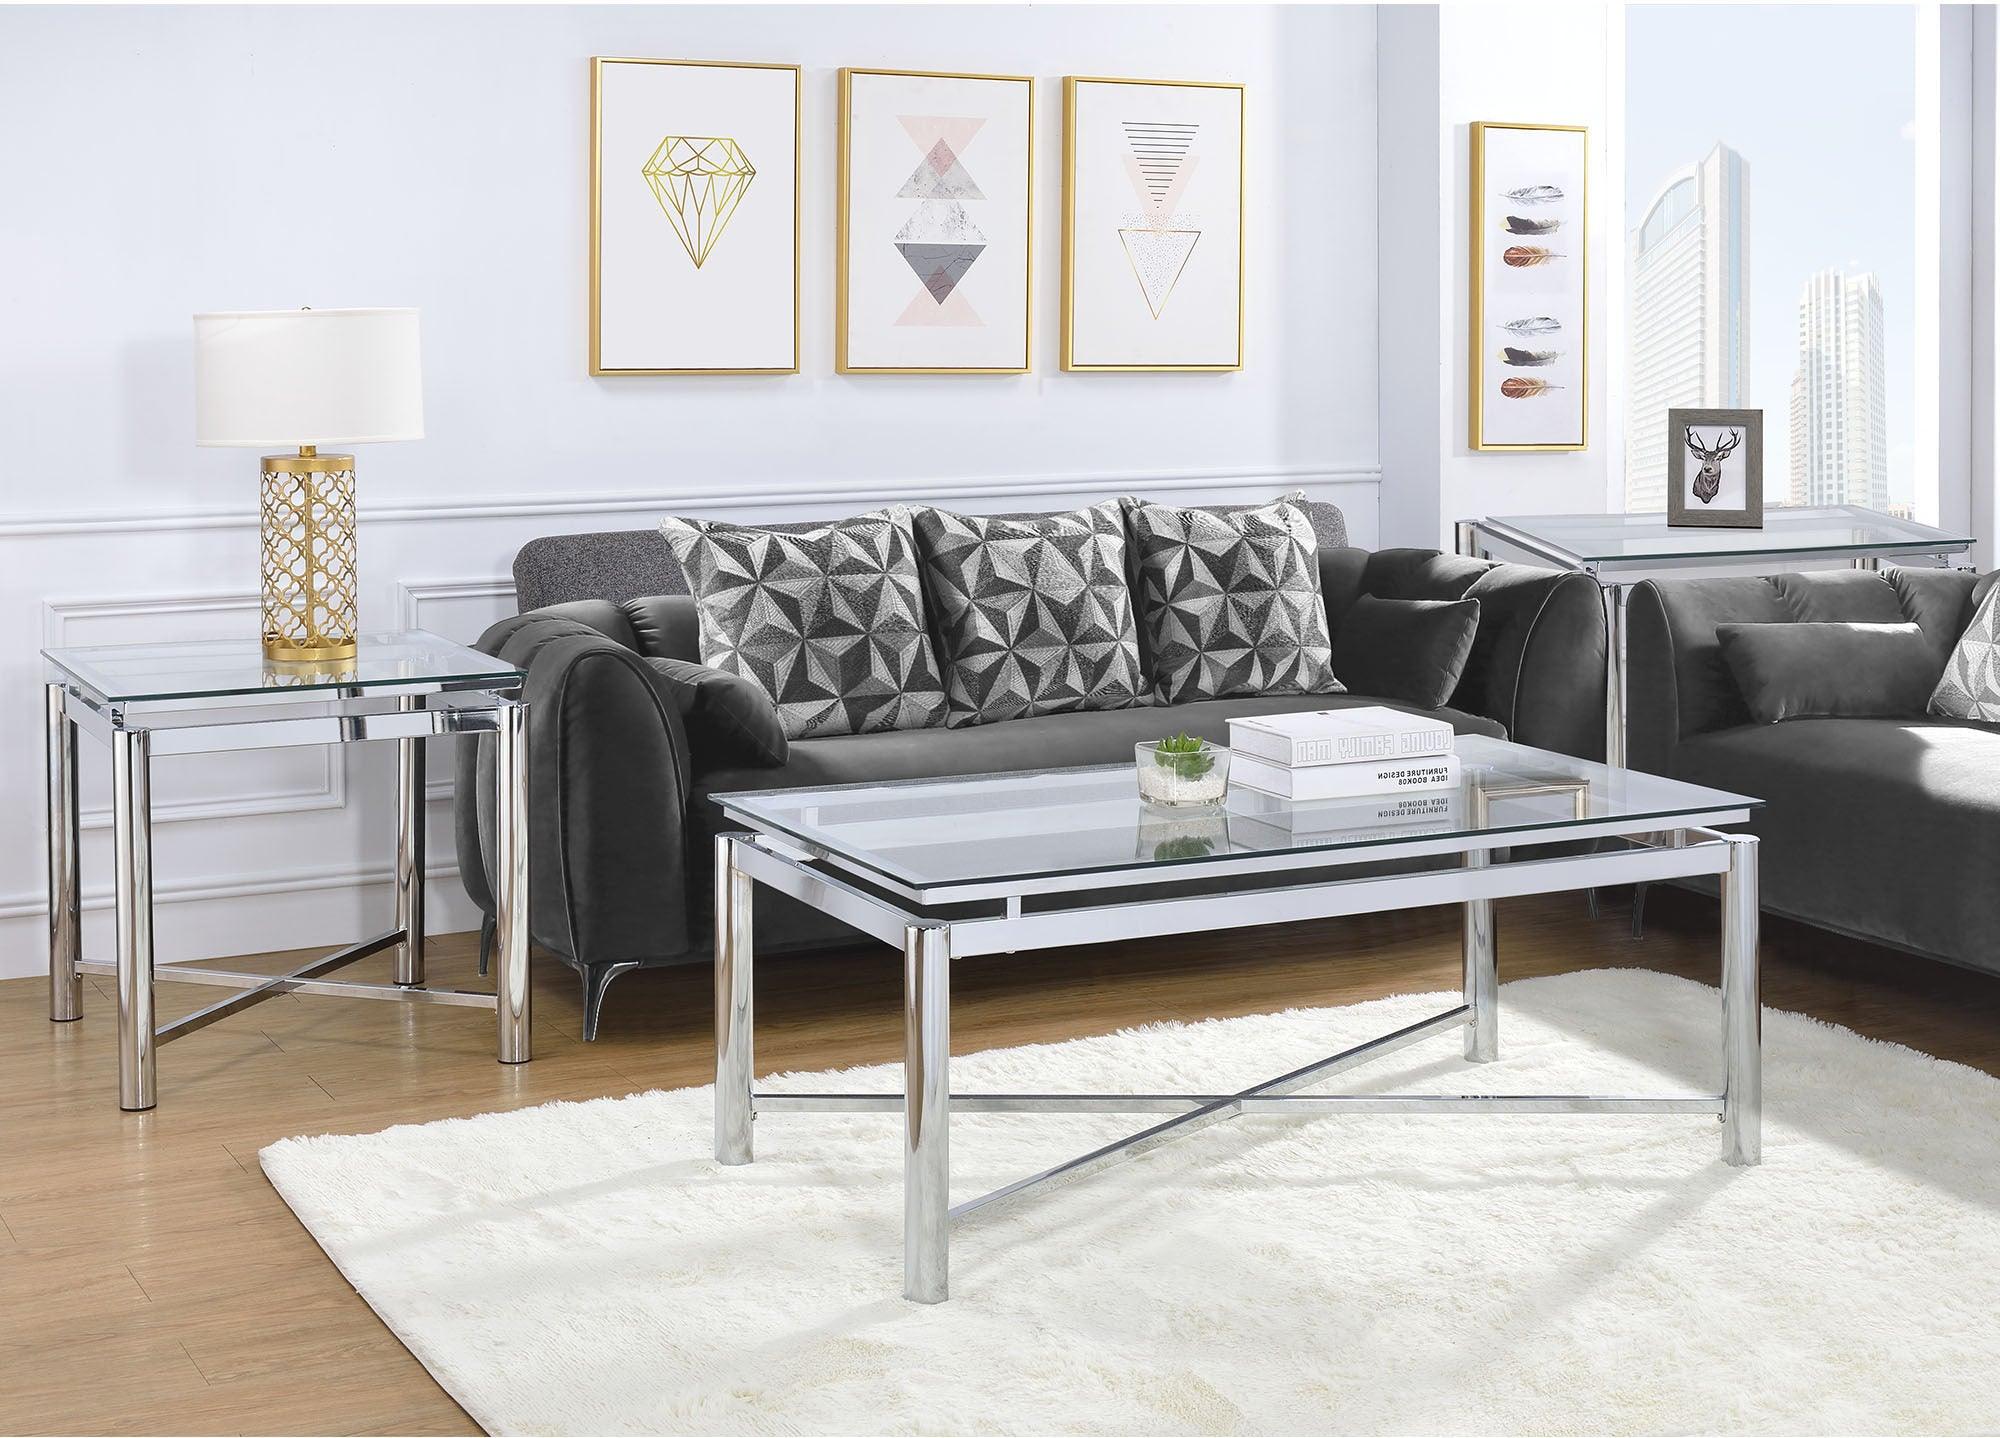 Elements Coffee Tables - Monroe Coffee Table Clear